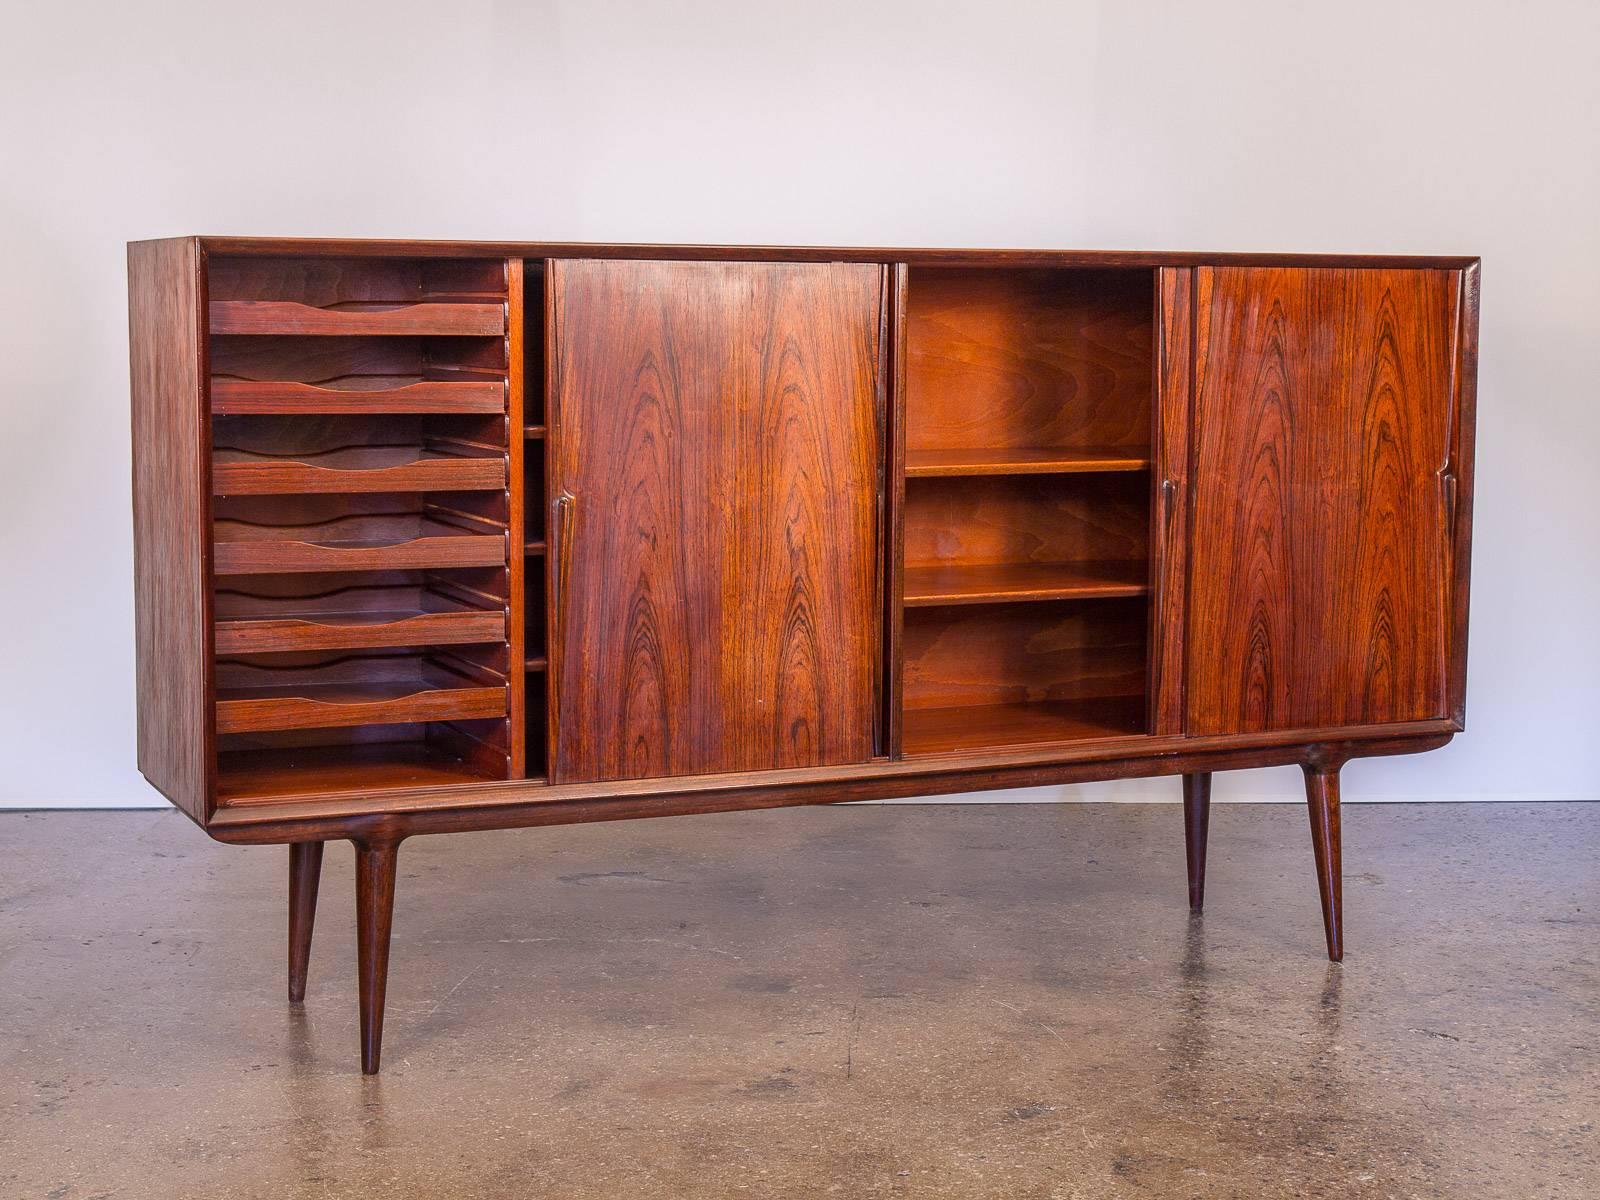 Tall, Scandinavian Modern 1960s Brazilian rosewood credenza by Omann Jun Møbelfabrik. A brilliant option for storing, organizing, and entertaining. Measures: Standing at 43.5 inches high, this robust sideboard has four cabinets for ample storage